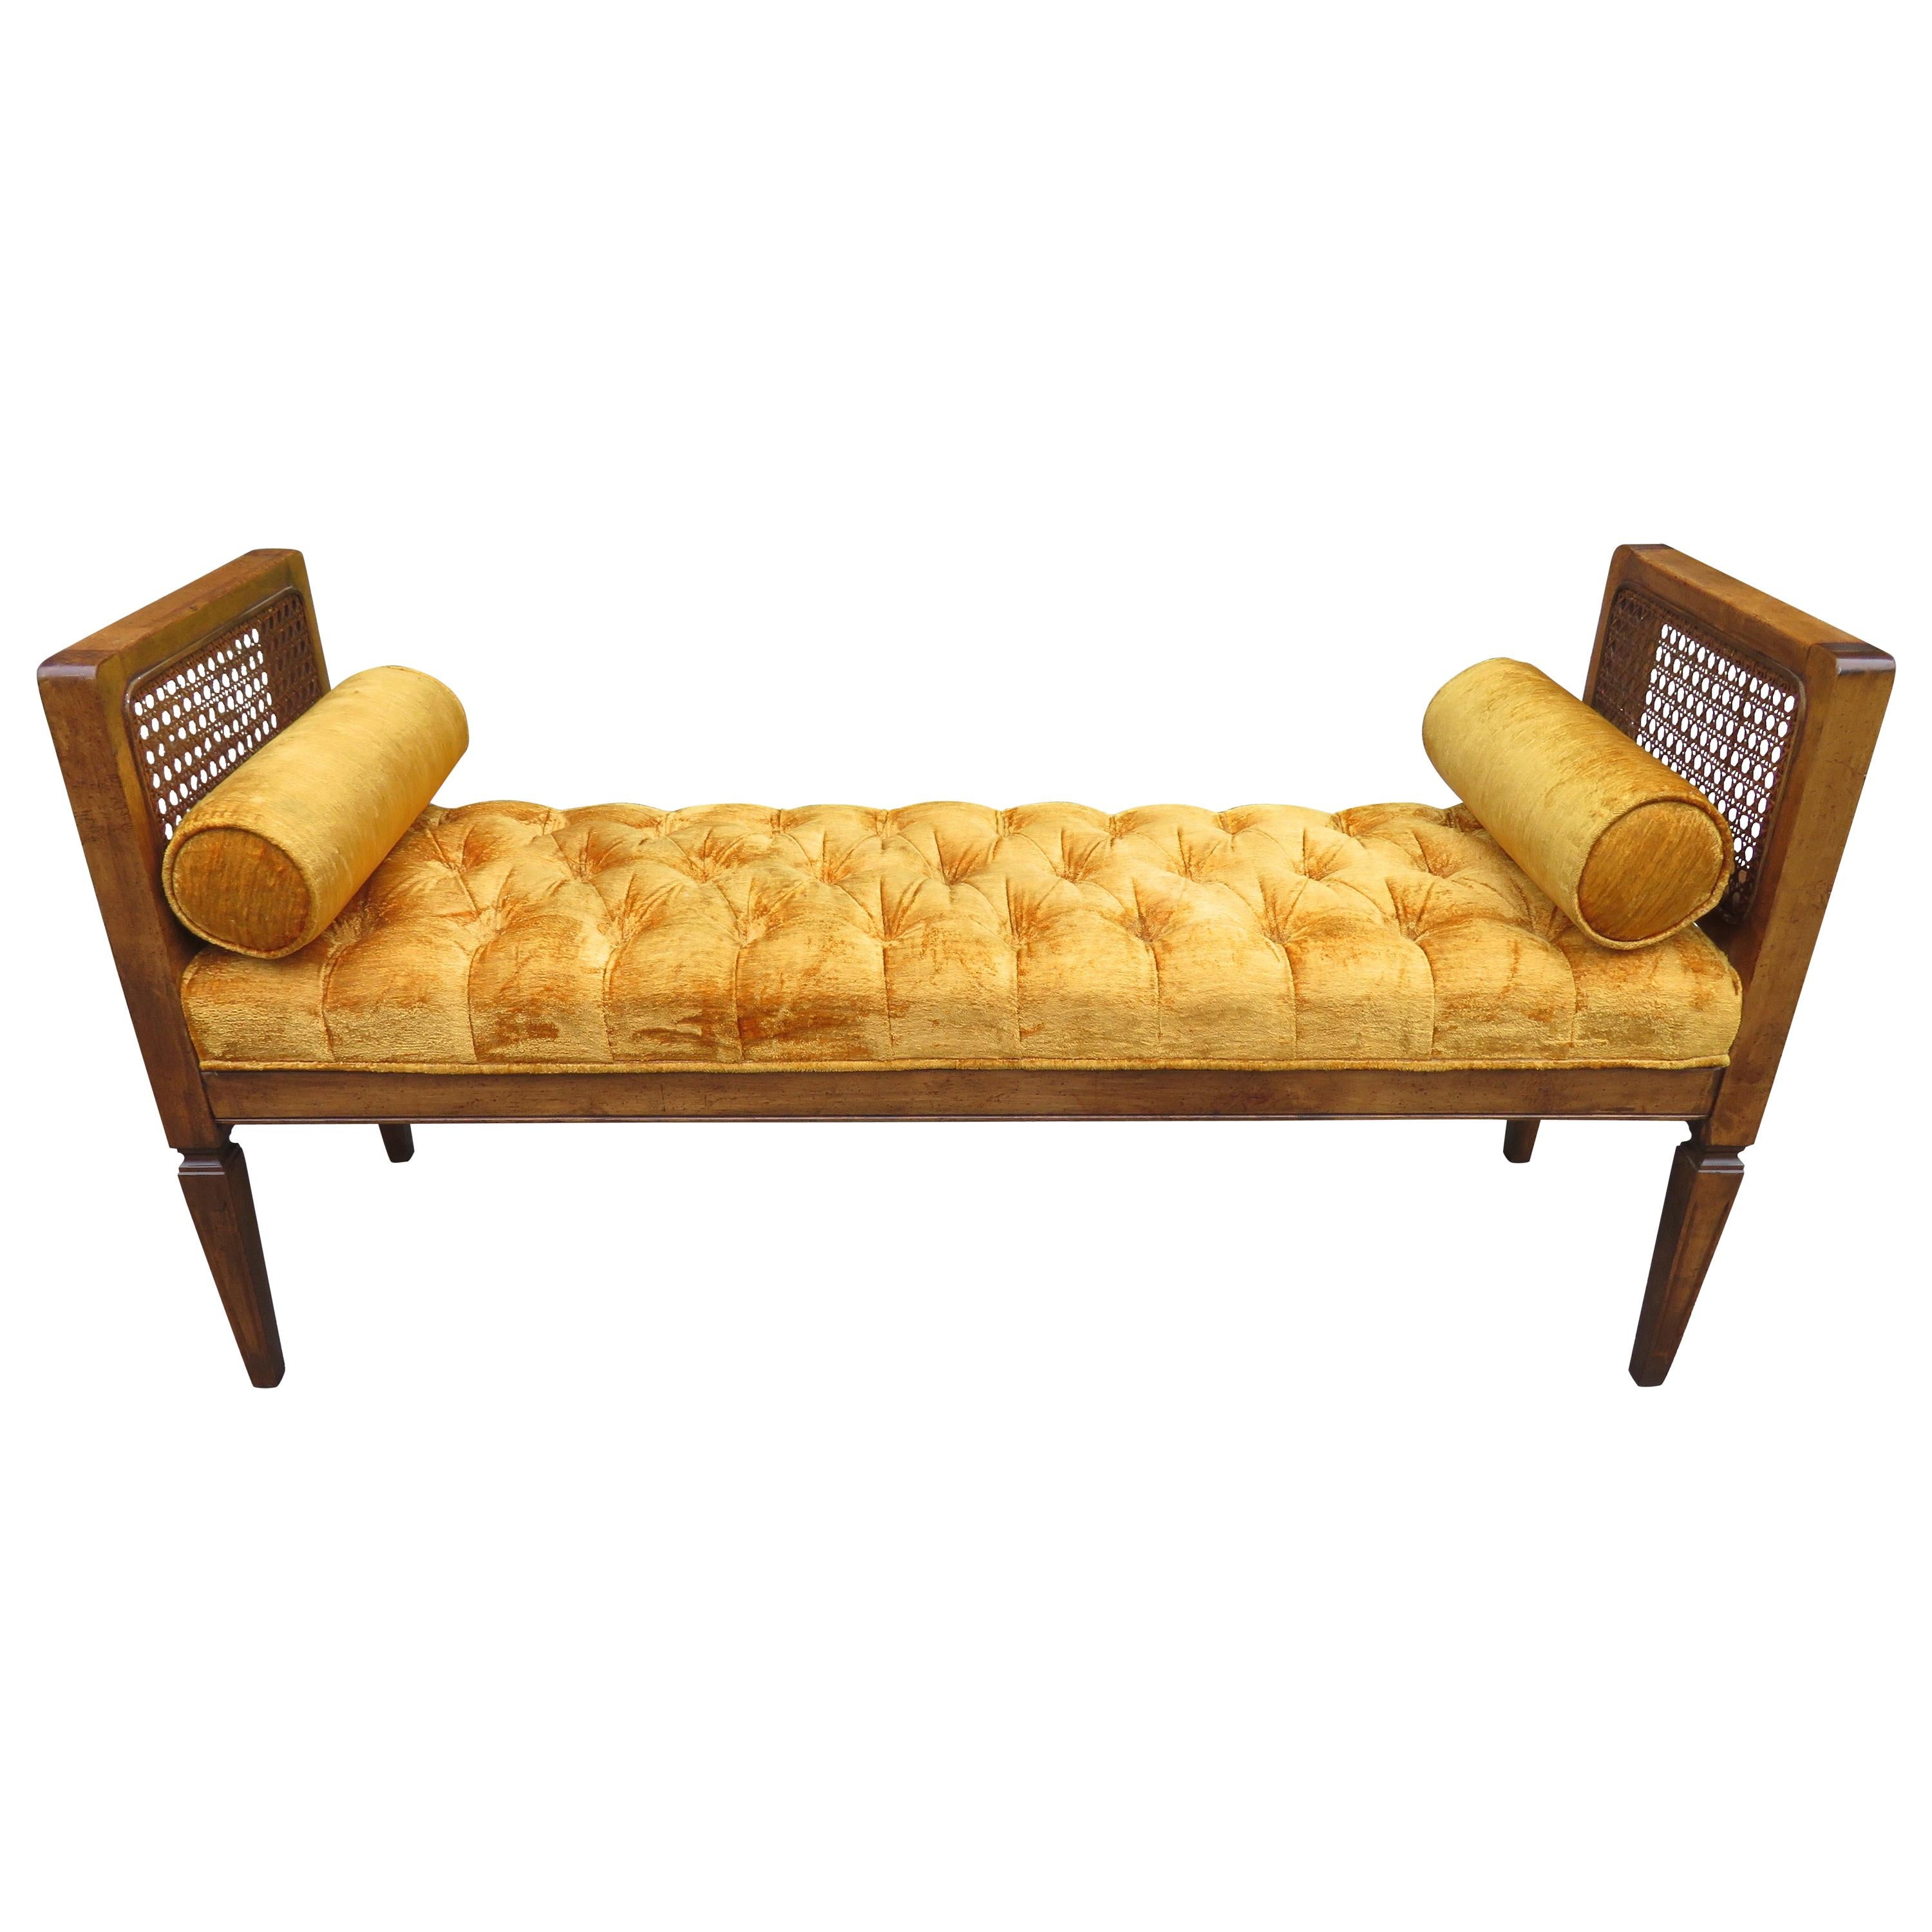 Lovely Caned Walnut Tufted Bench Mid-Century Modern